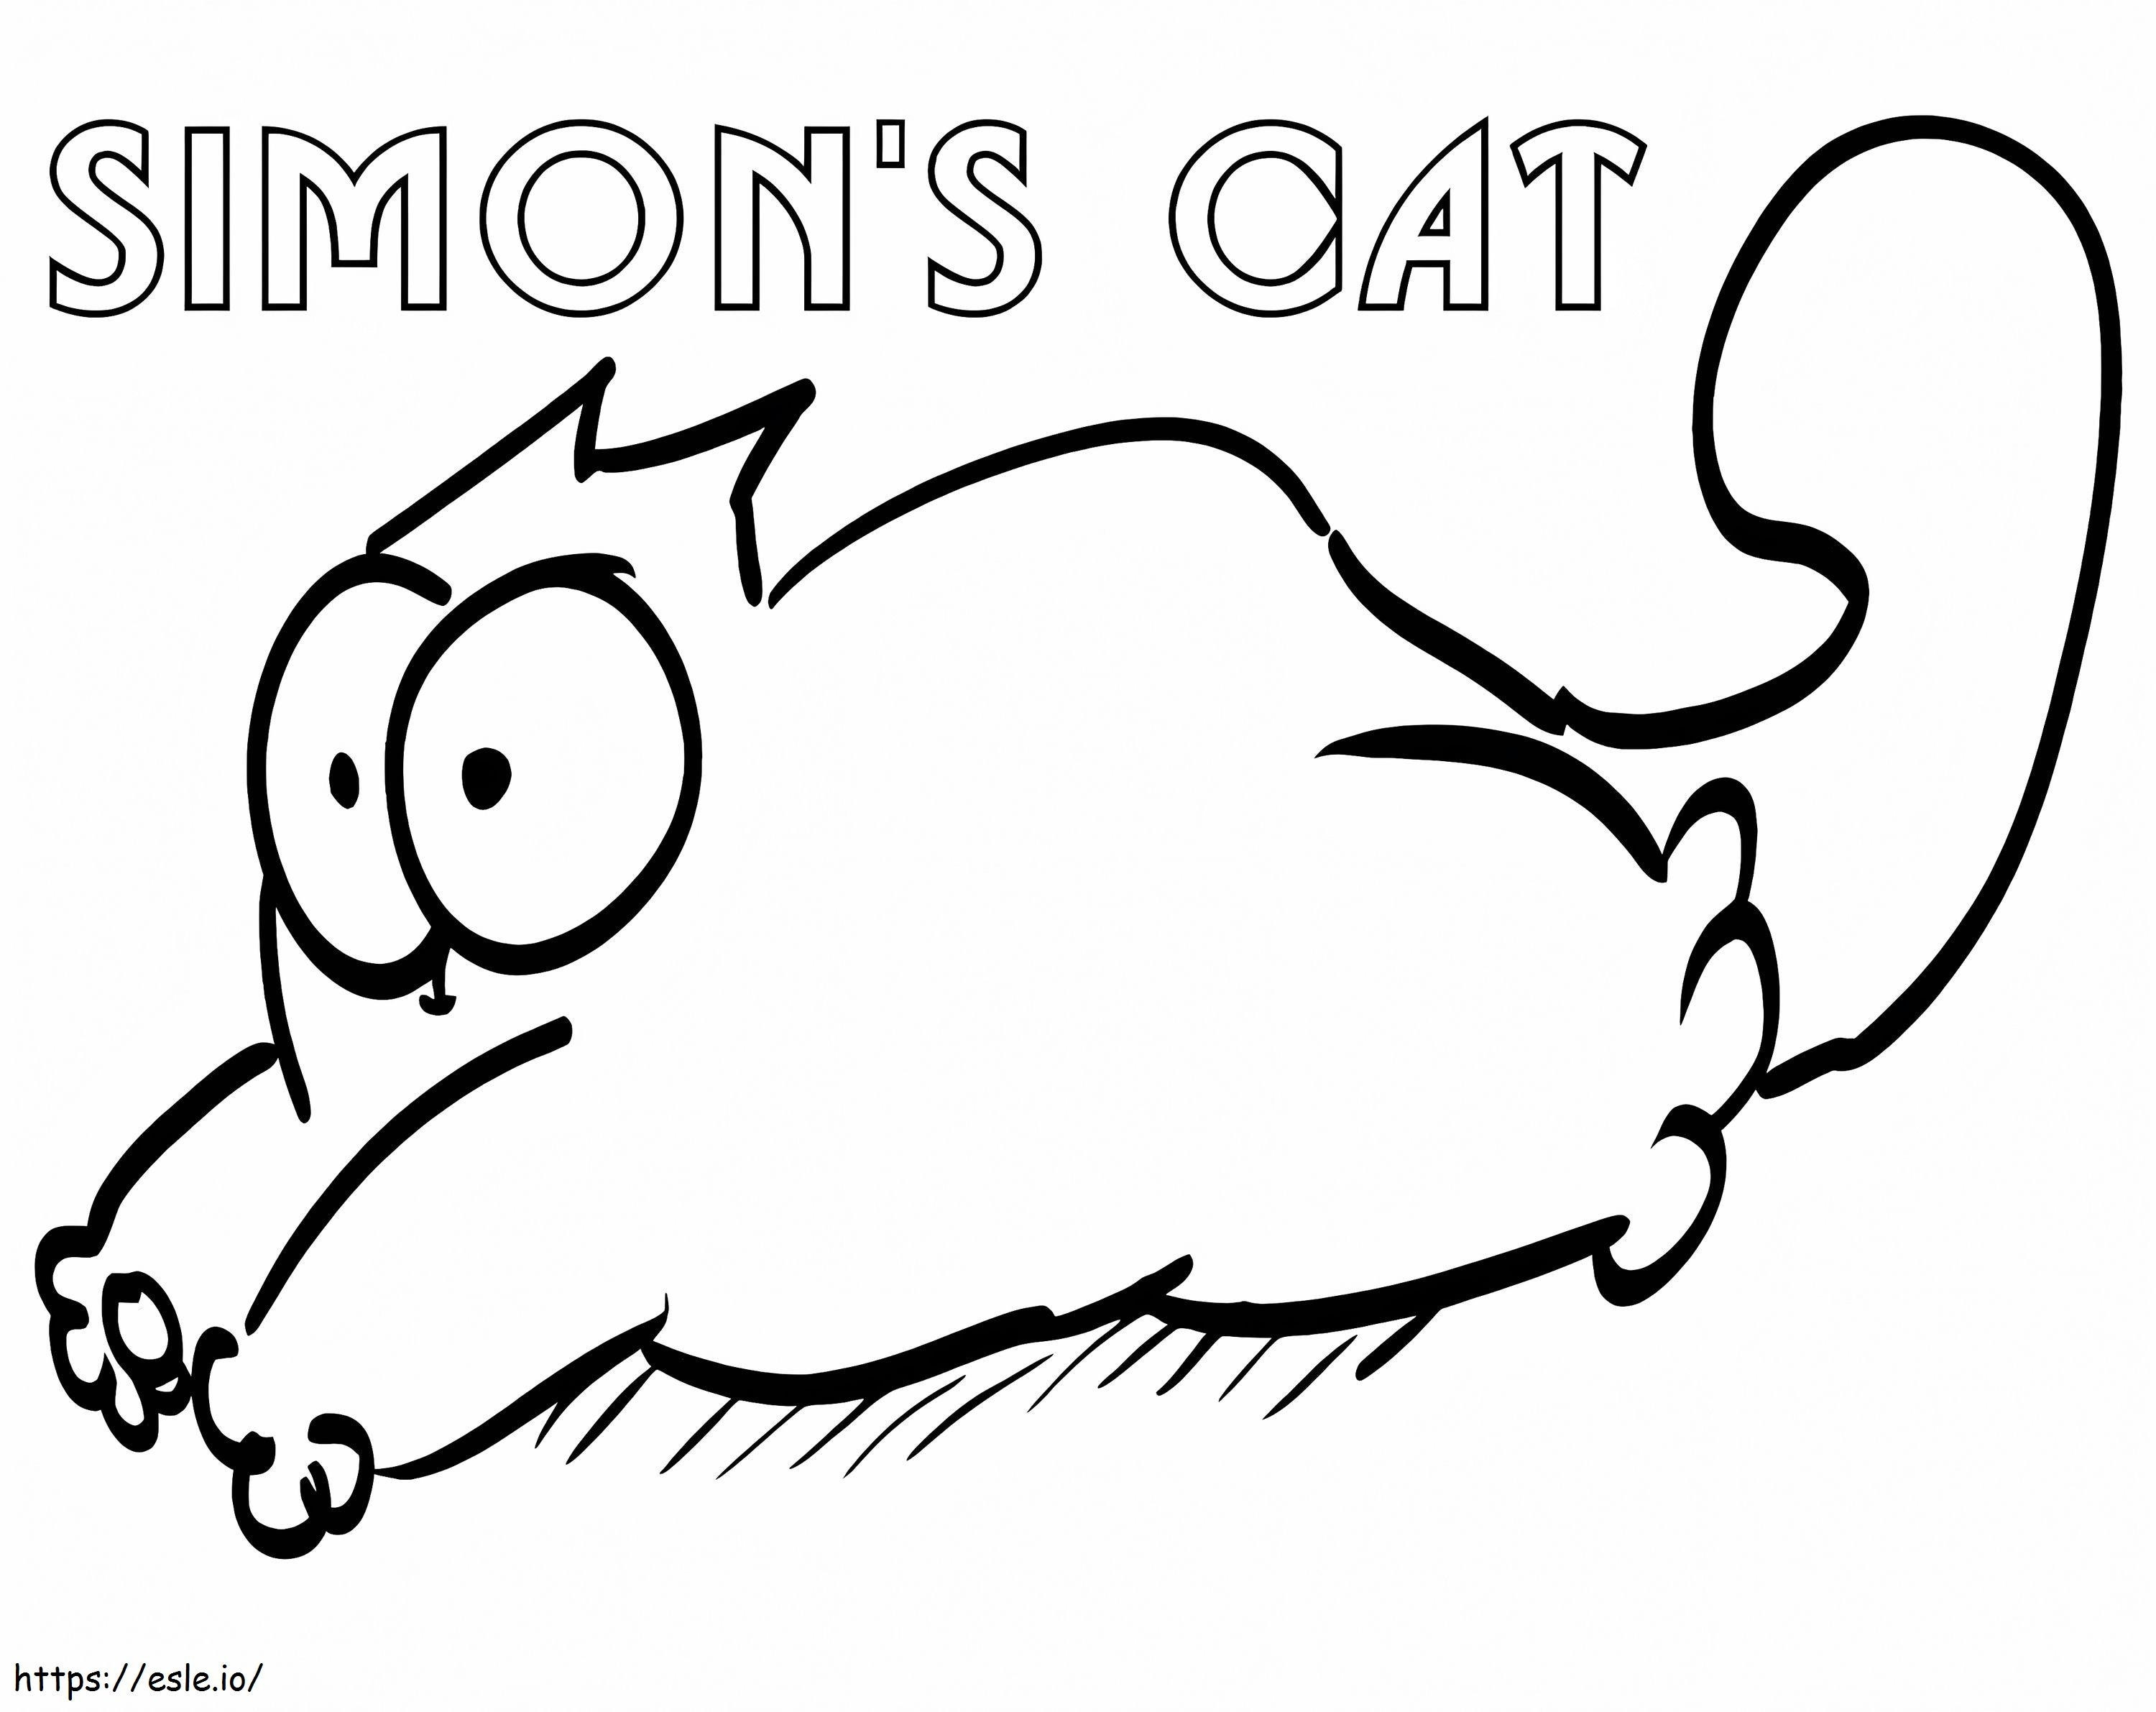 Simons Cat 2 coloring page